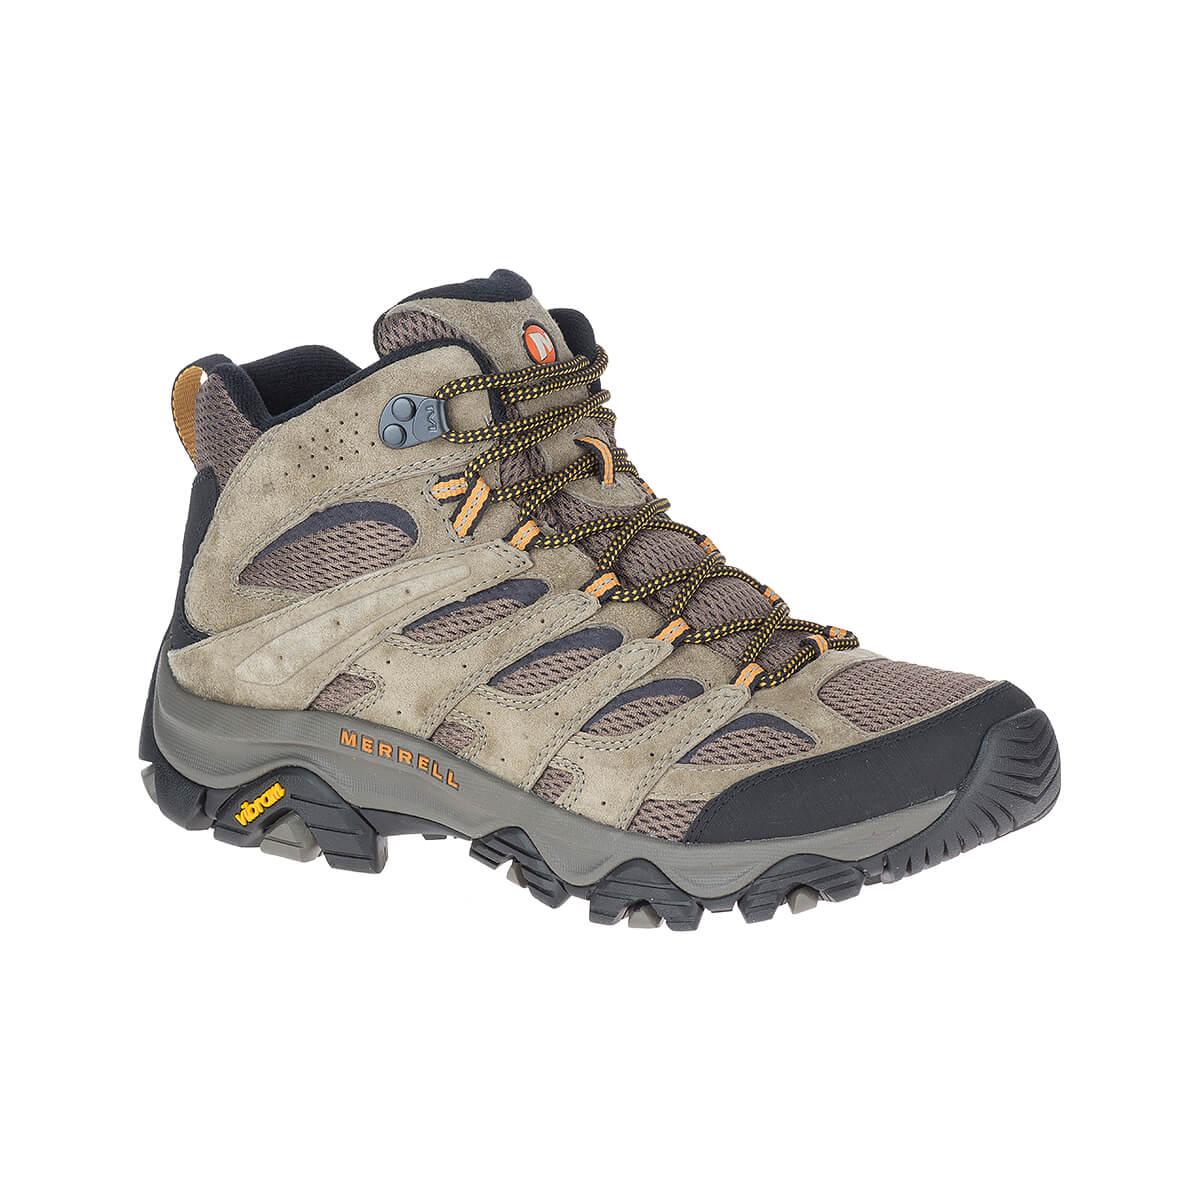 Men's Moab 3 Mid Hiking Boots